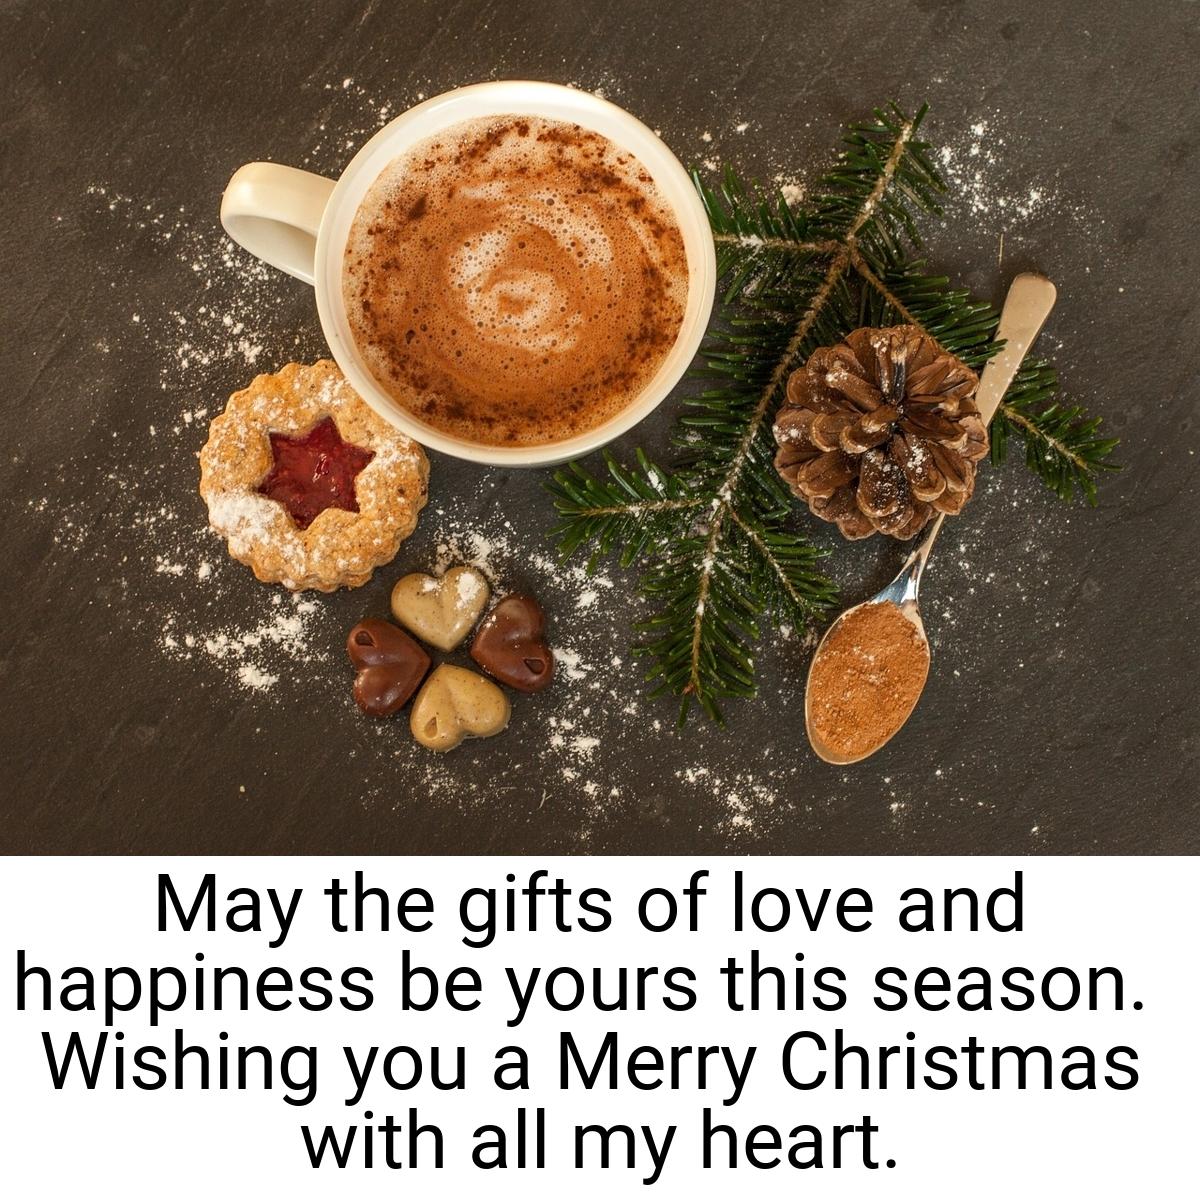 May the gifts of love and happiness be yours this season